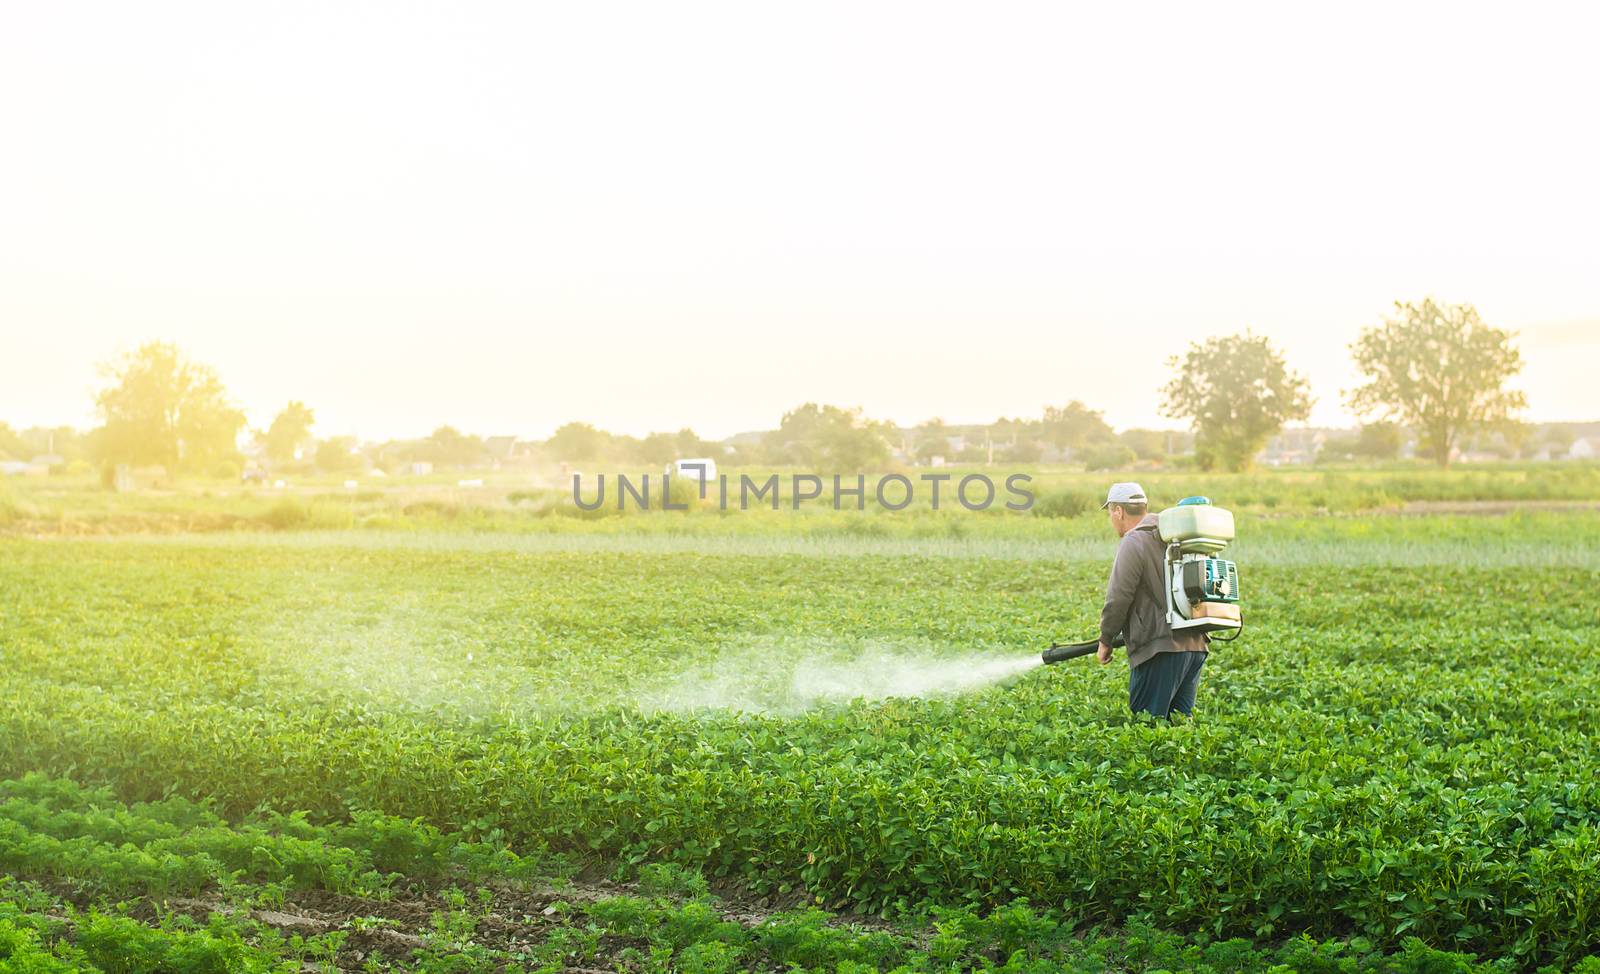 A farmer with a mist sprayer blower processes the potato plantation from pests and fungus infection. Harvest processing. Protection and care. Use chemicals in agriculture. Agriculture and agribusiness